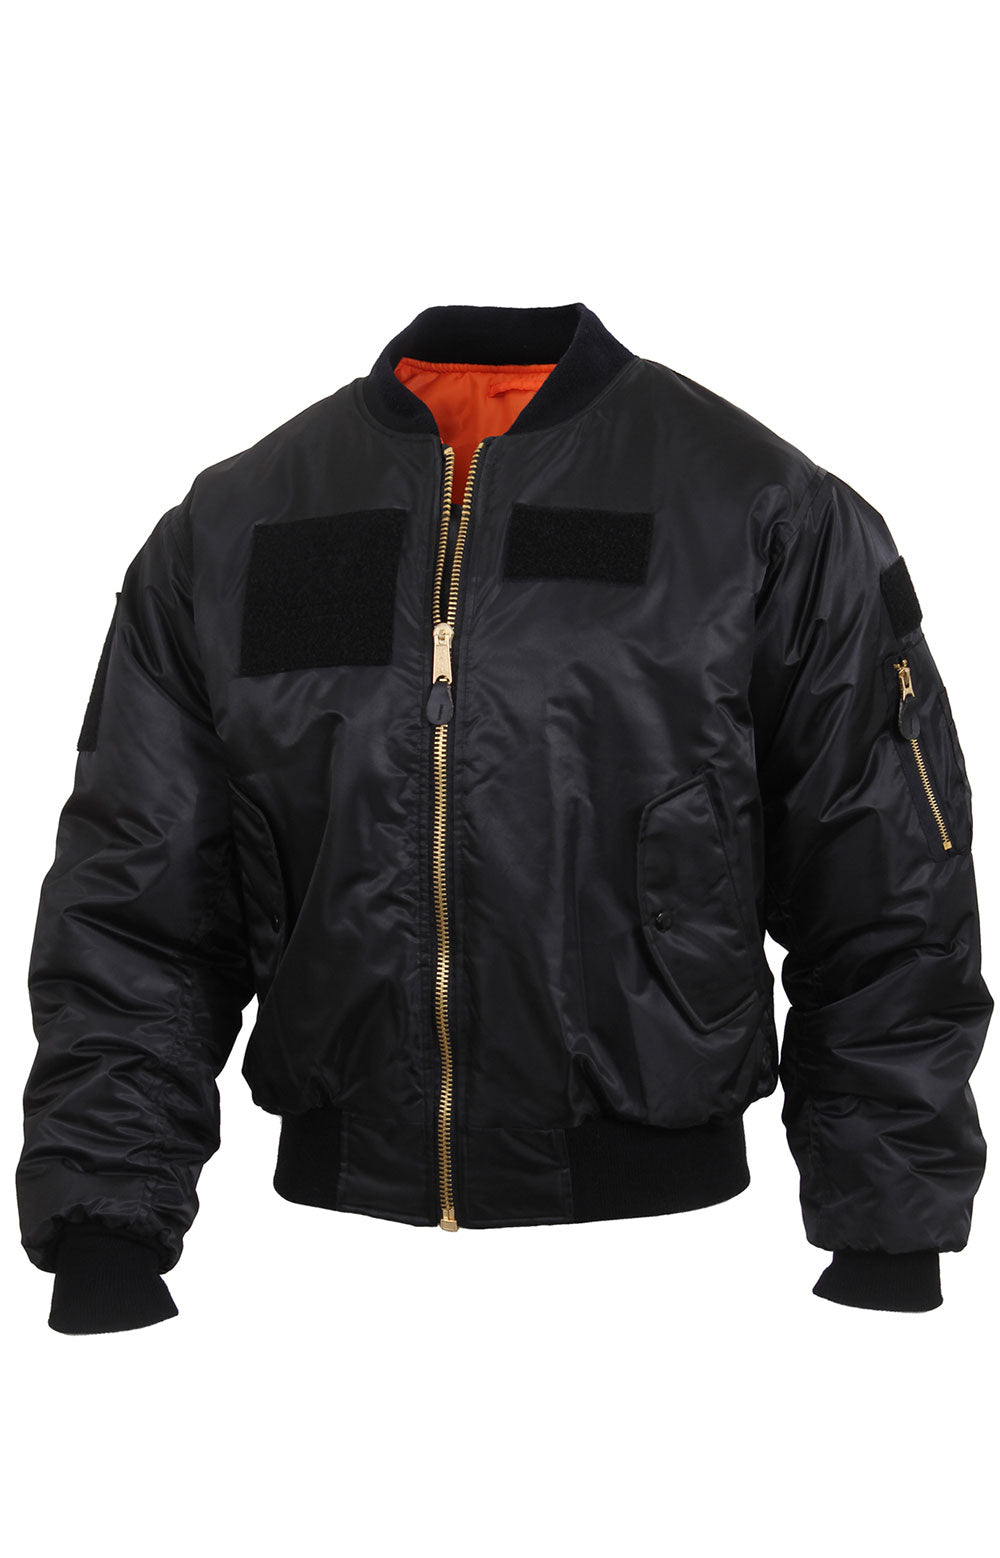 (7250) Rothco MA-1 Flight Jacket with Patches - Black